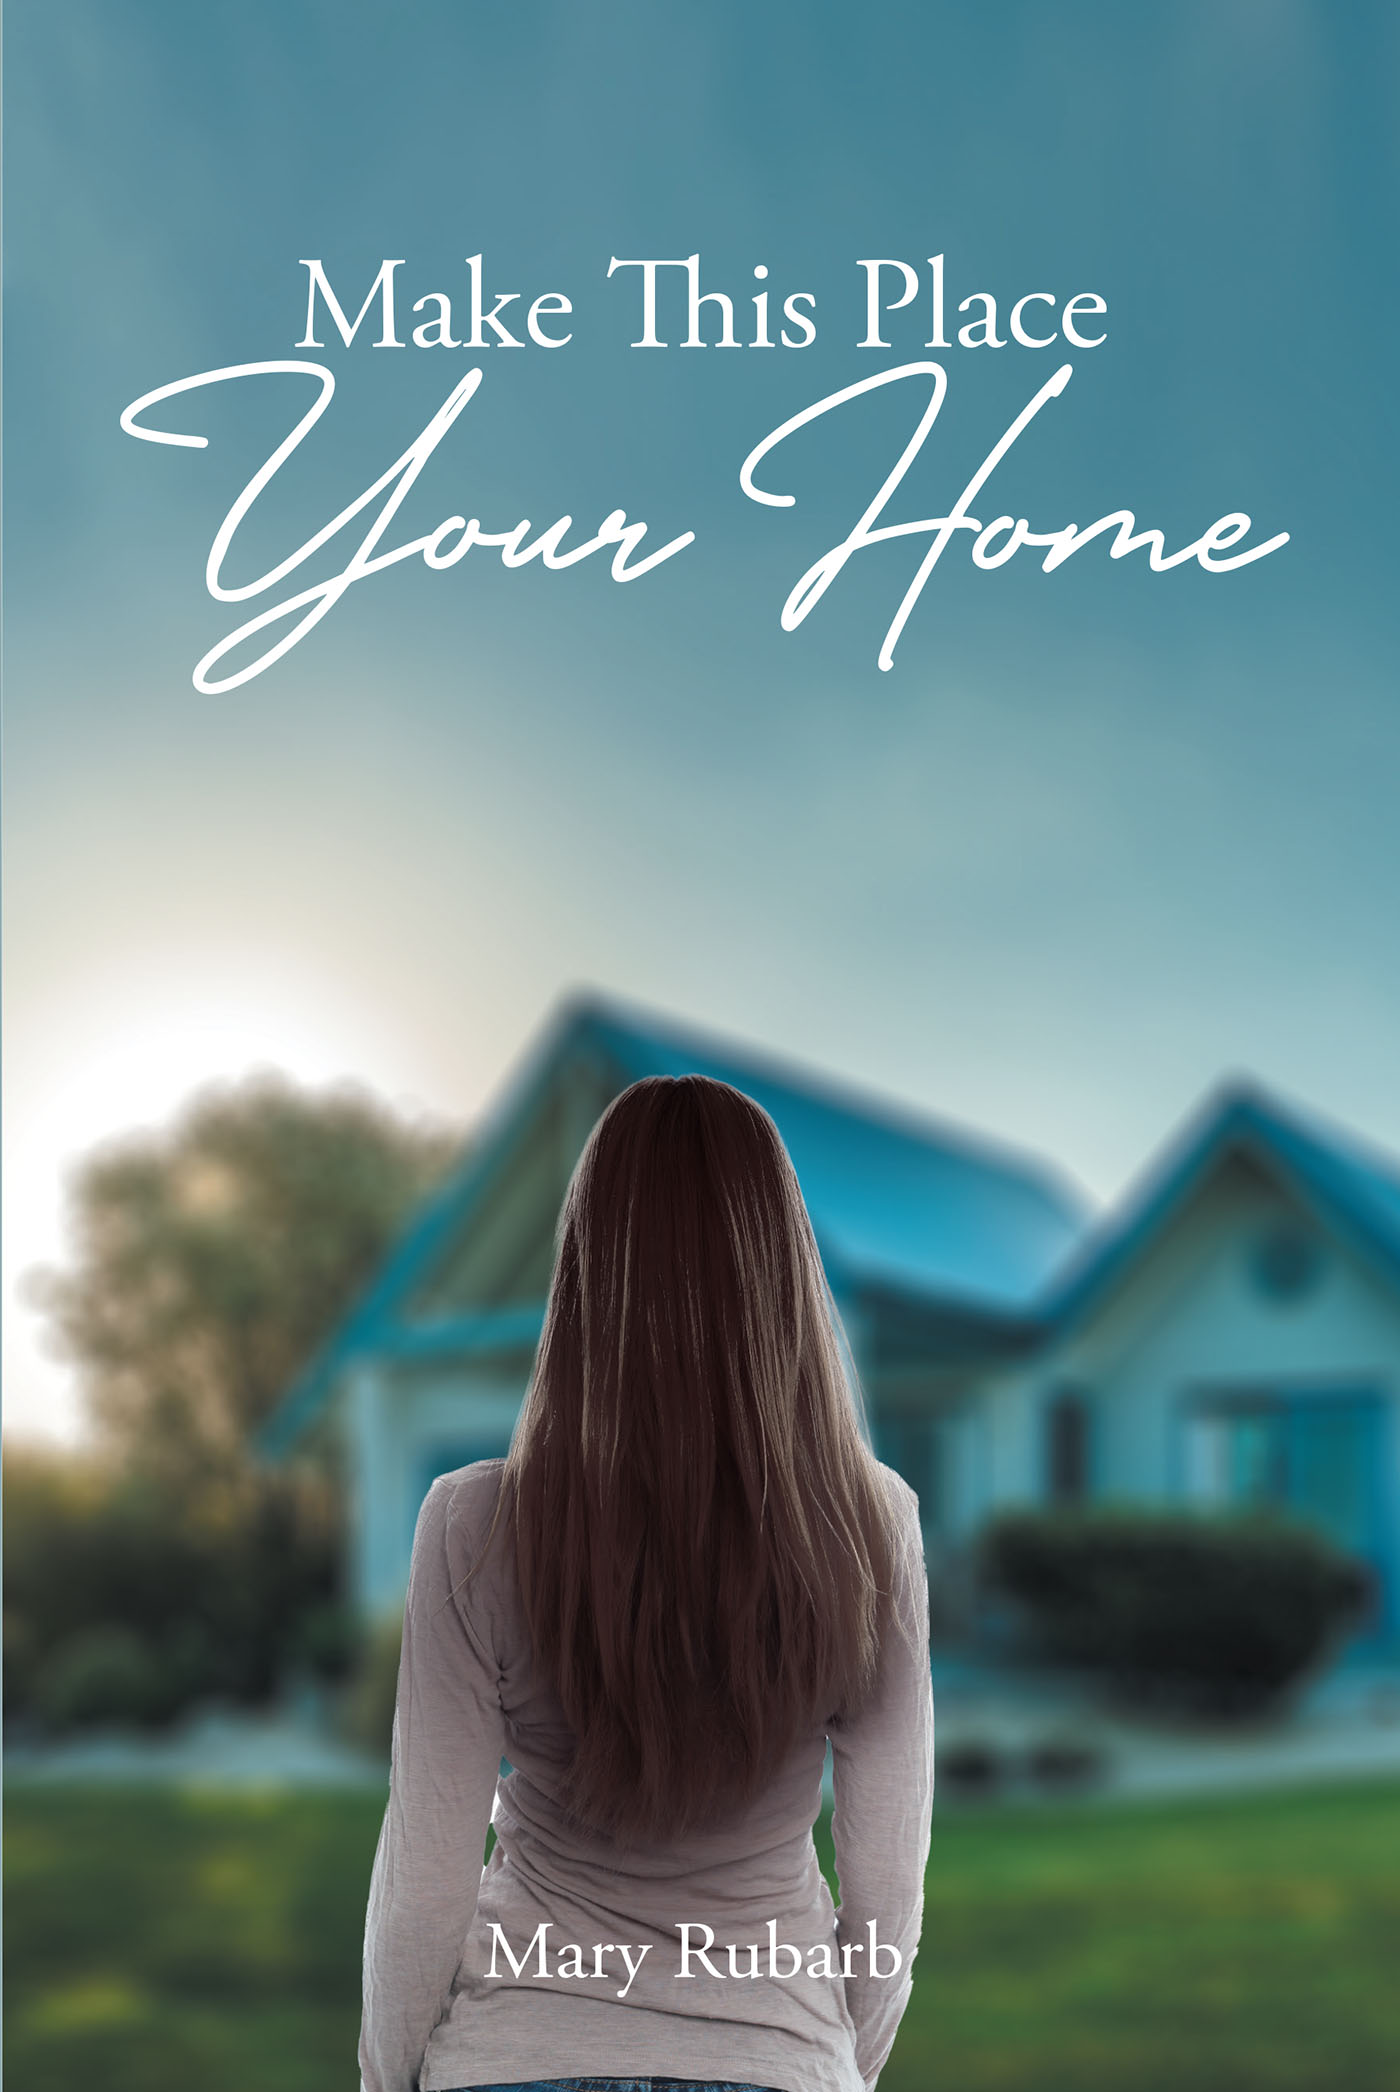 Mary Rubarb’s Newly Released "Make This Place Your Home" is an Uplifting Story of Family, Faith, and Finding Home